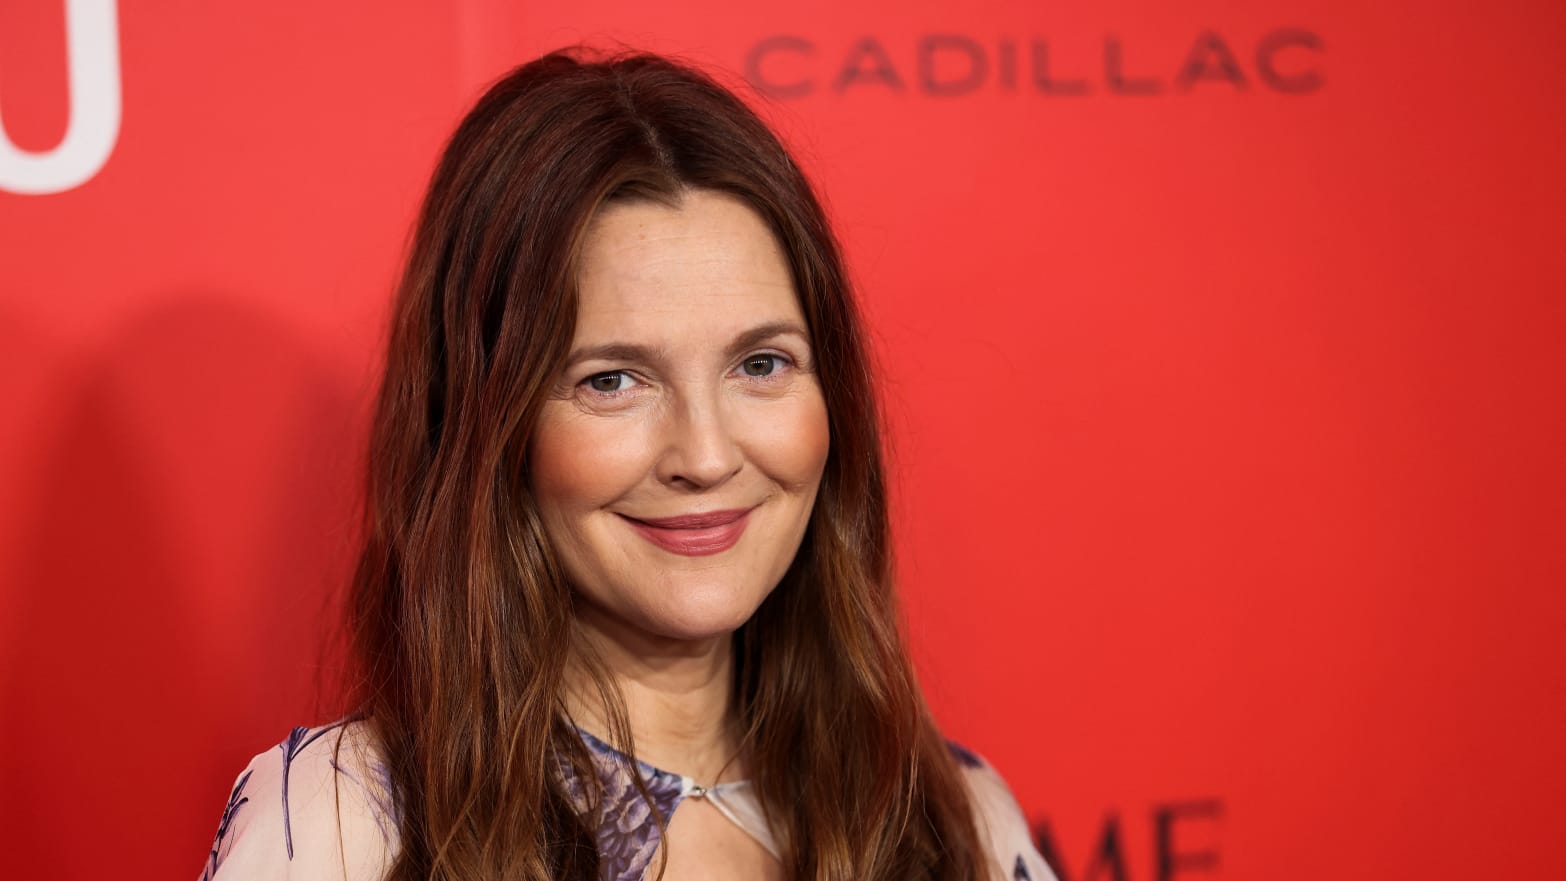 Drew Barrymore poses on the red carpet as she arrives for the Time Magazine 100 gala celebrating their list of the 100 Most Influential People in the world in New York City, New York, April 26, 2023.